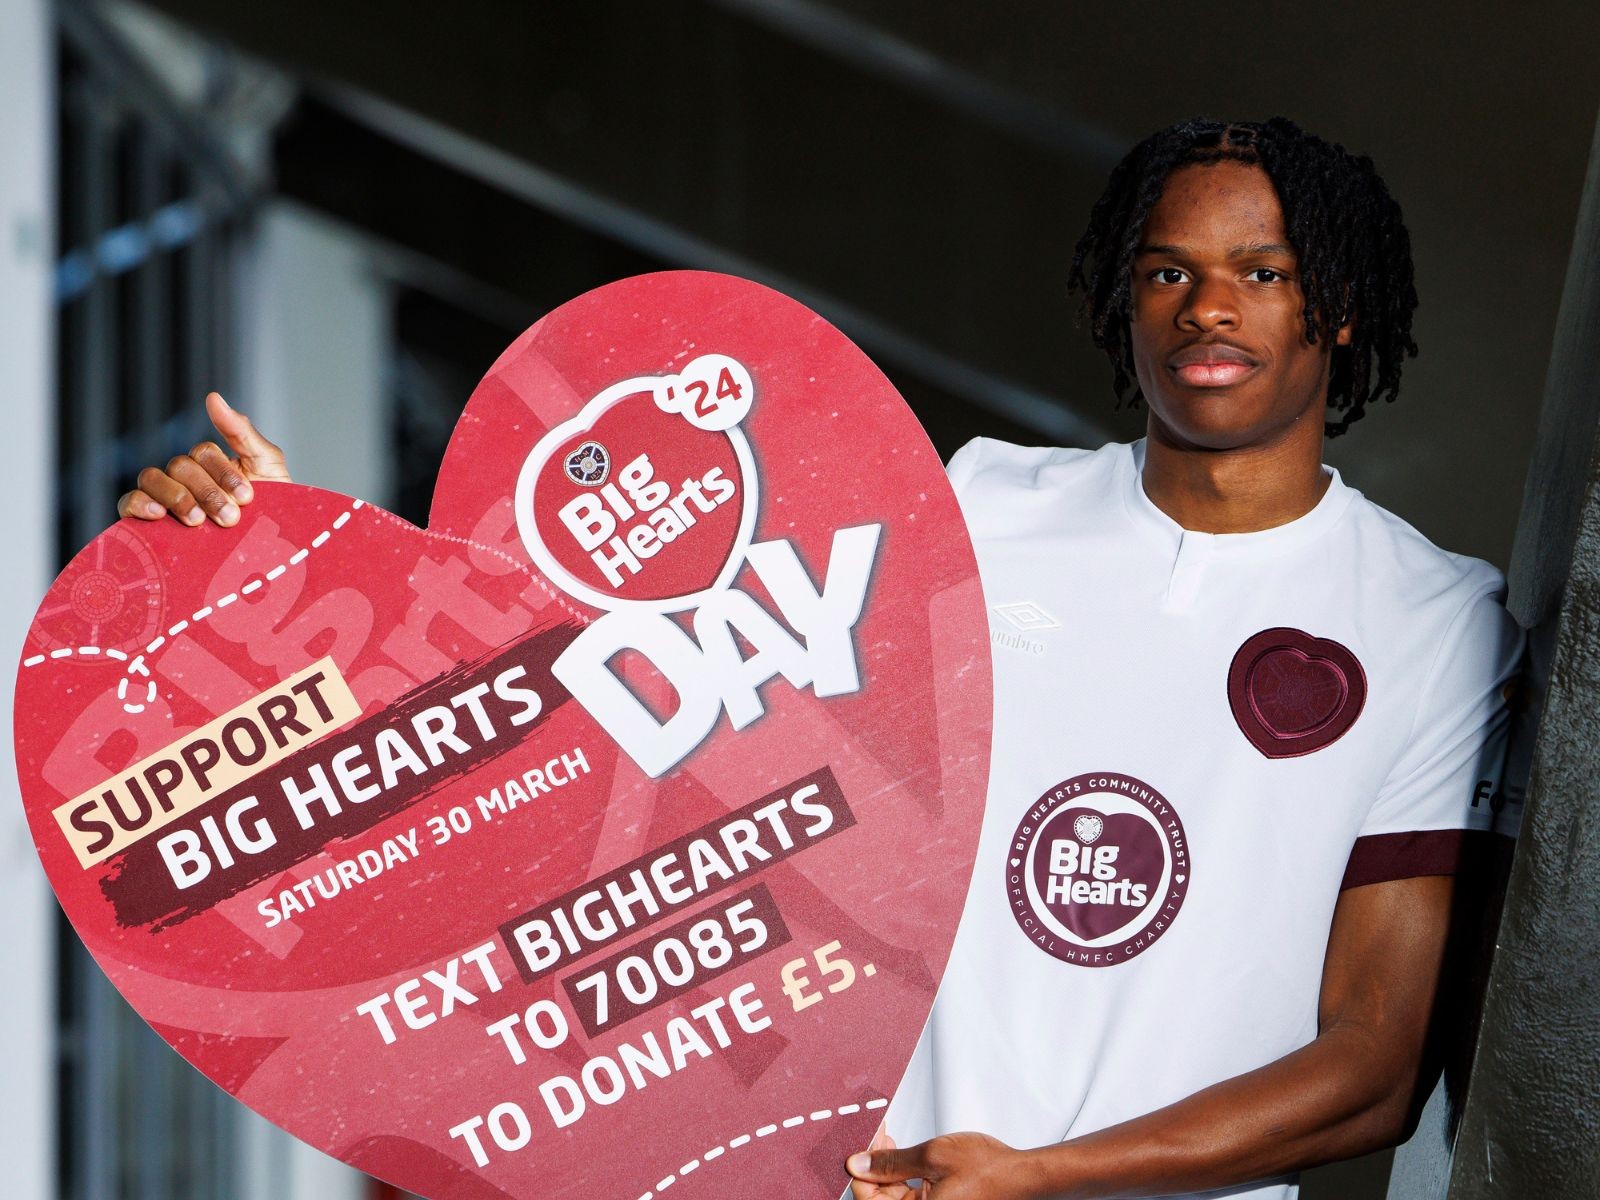  » Big Hearts to feature on 150th anniversary Hearts’ kit!